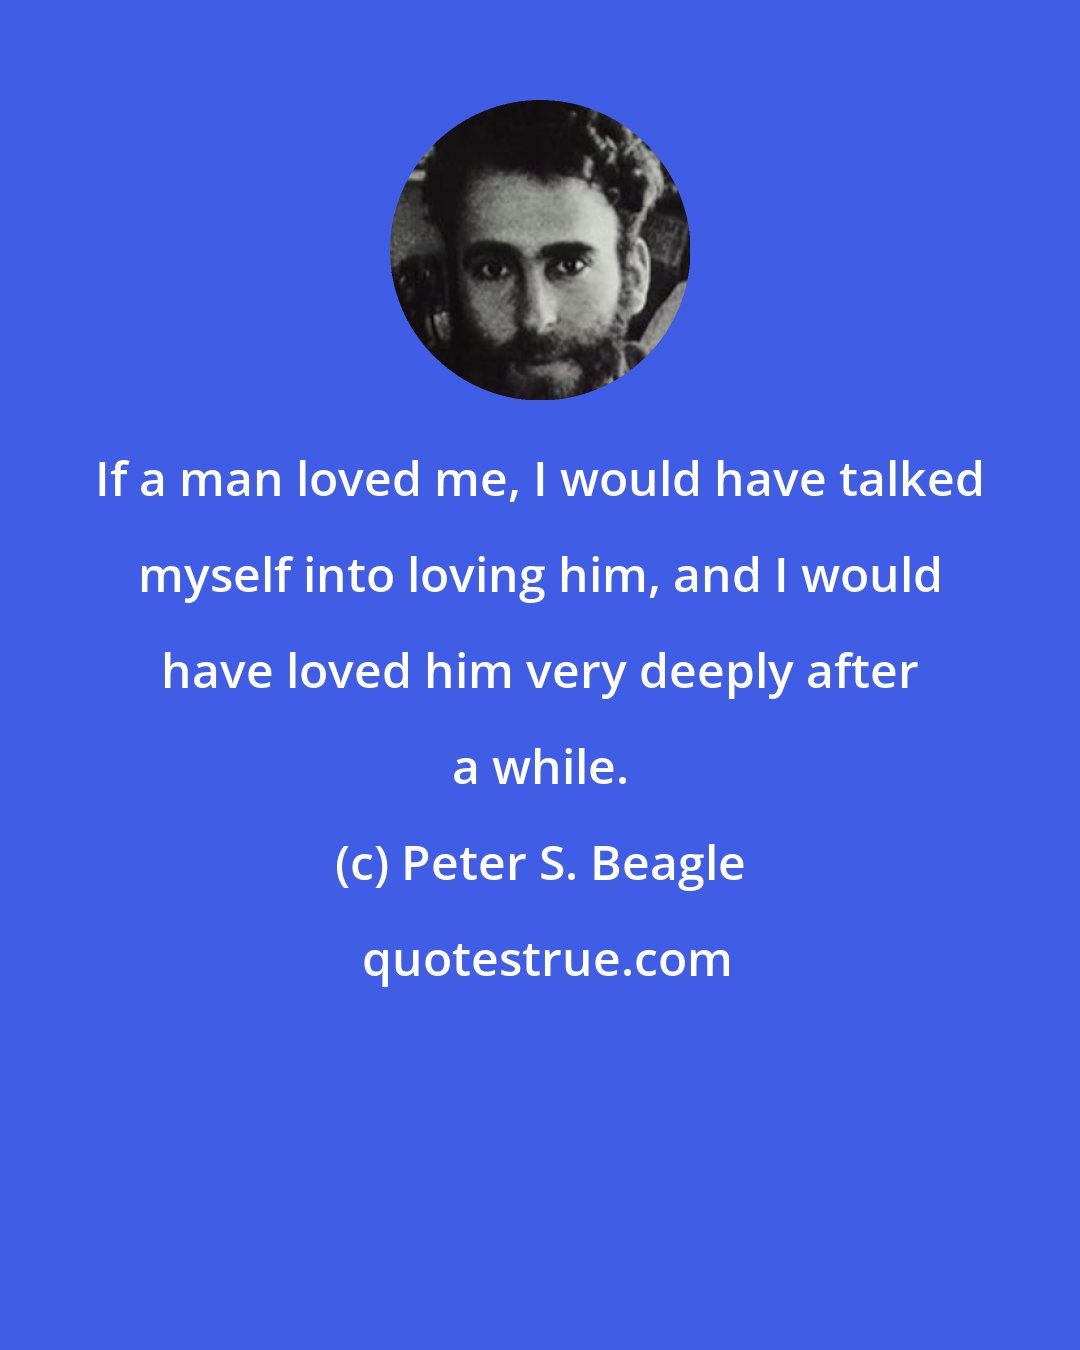 Peter S. Beagle: If a man loved me, I would have talked myself into loving him, and I would have loved him very deeply after a while.